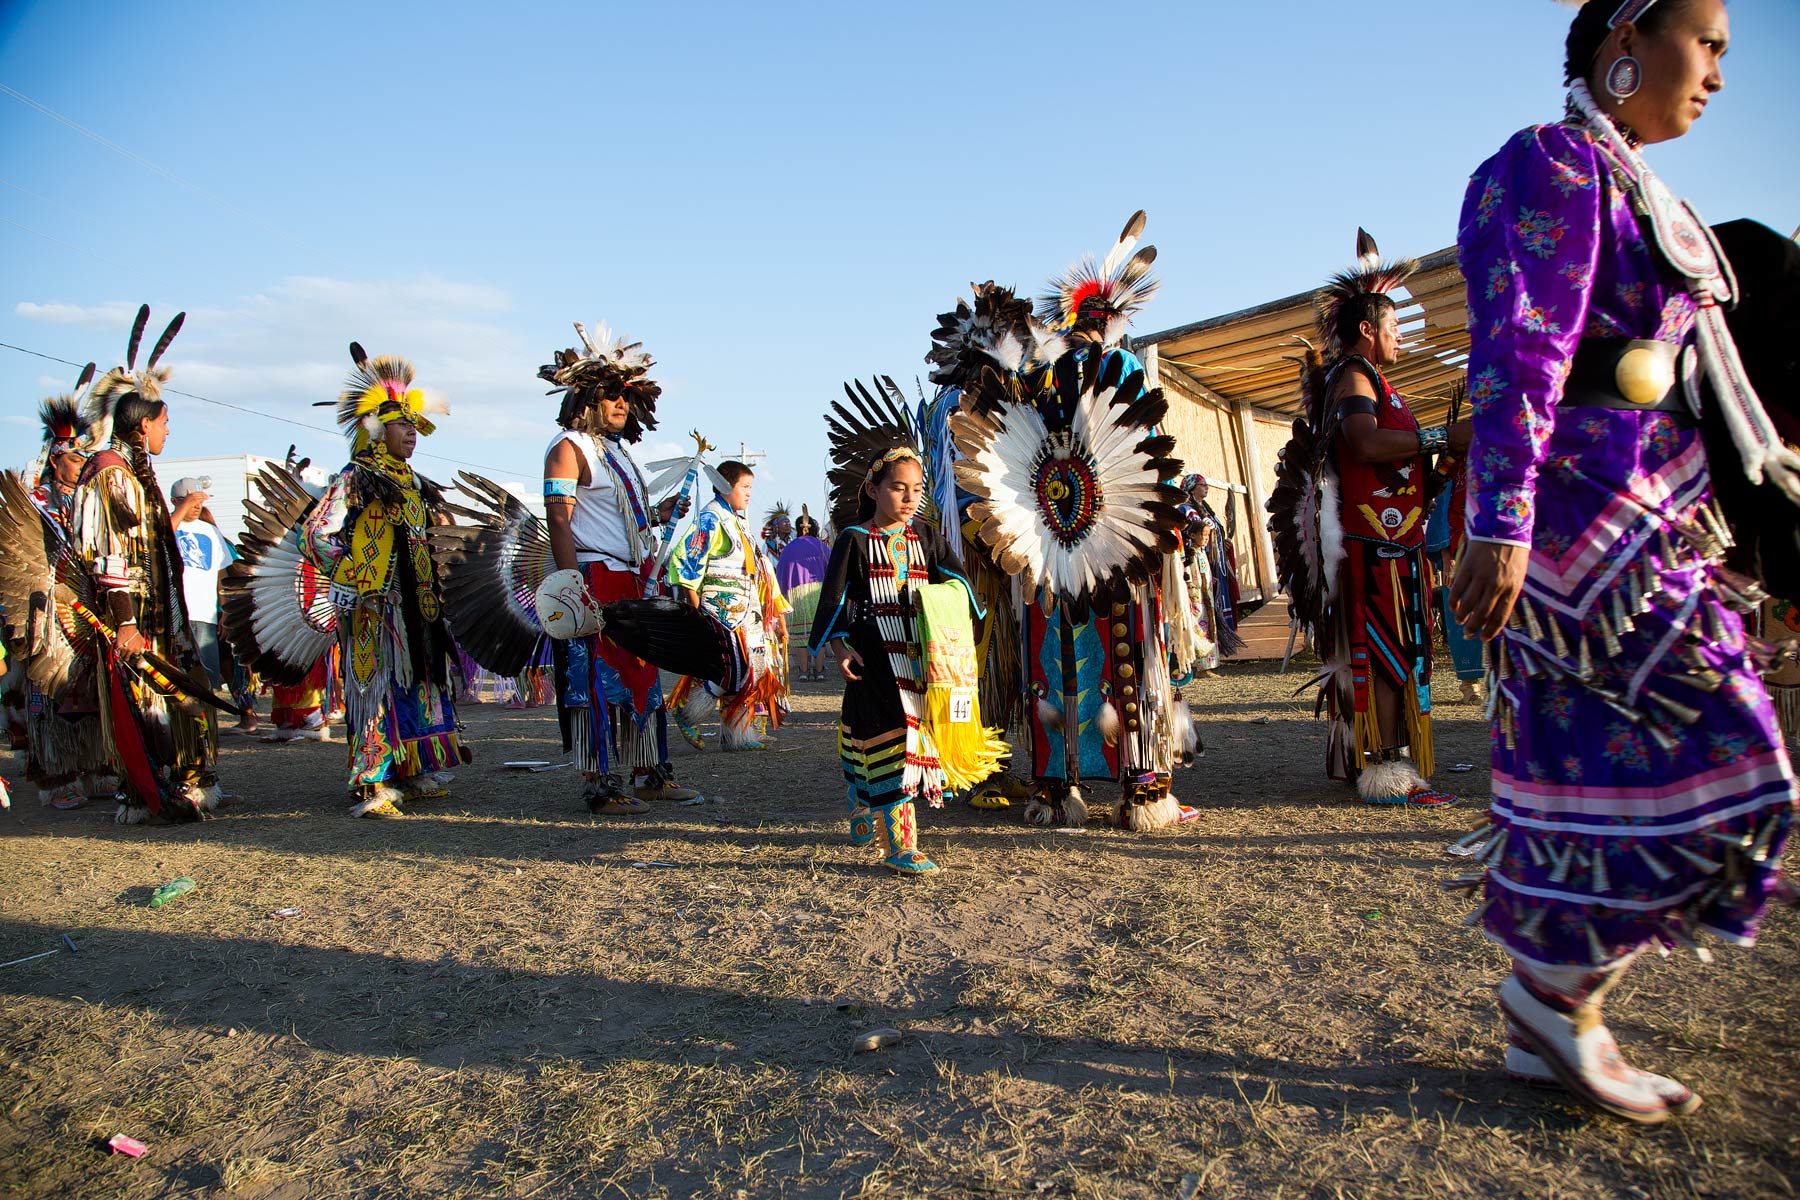 Dancers line up for Grand Entry at the Heart Butte Pow Wow
Blackfeet Indian Reservation
Montana